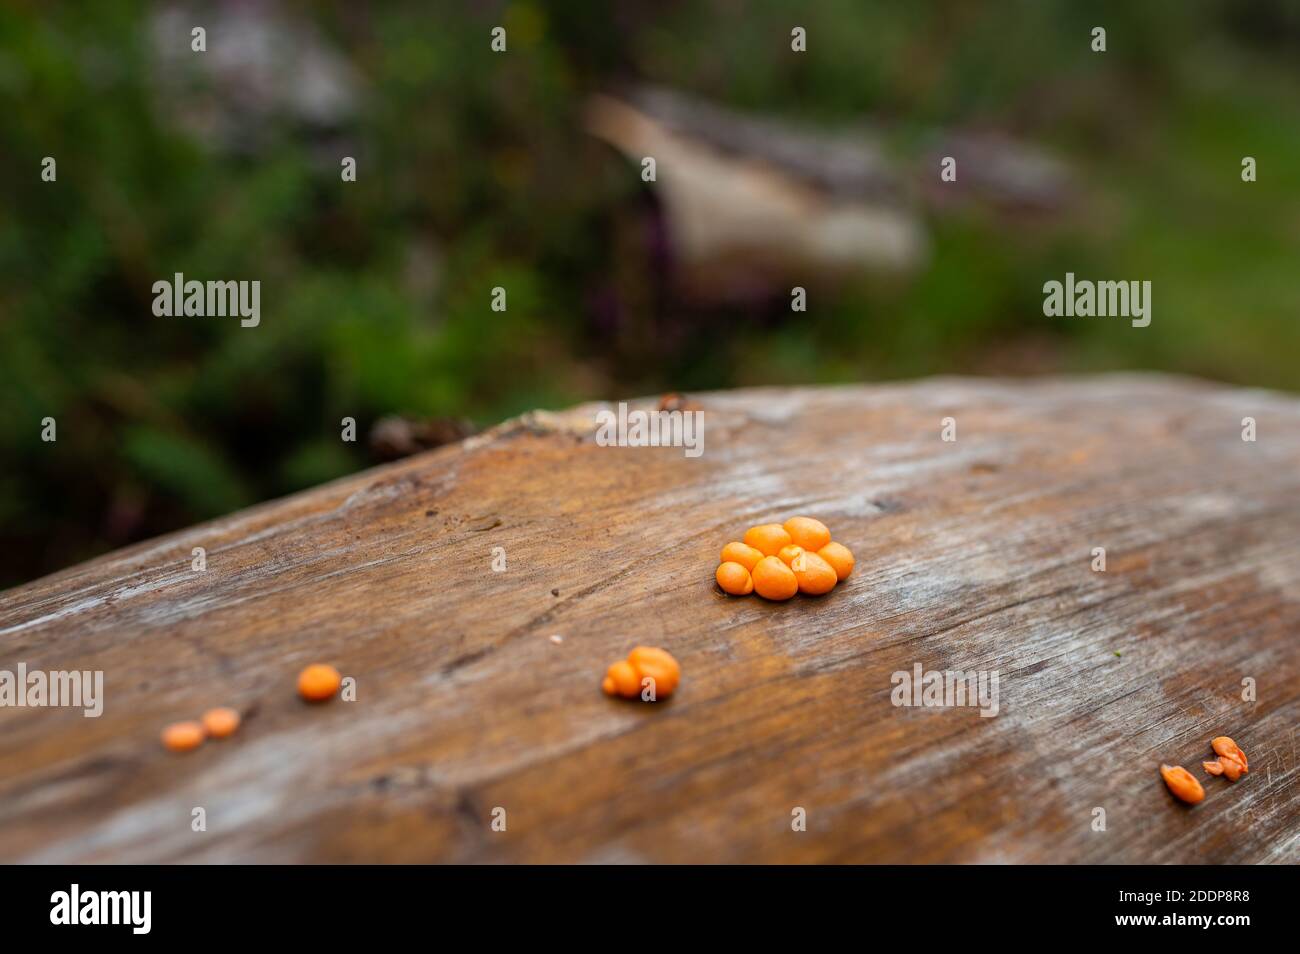 An orange slime mold on a fallen trunk on a rainy day in late summer (Brittany, France) Stock Photo